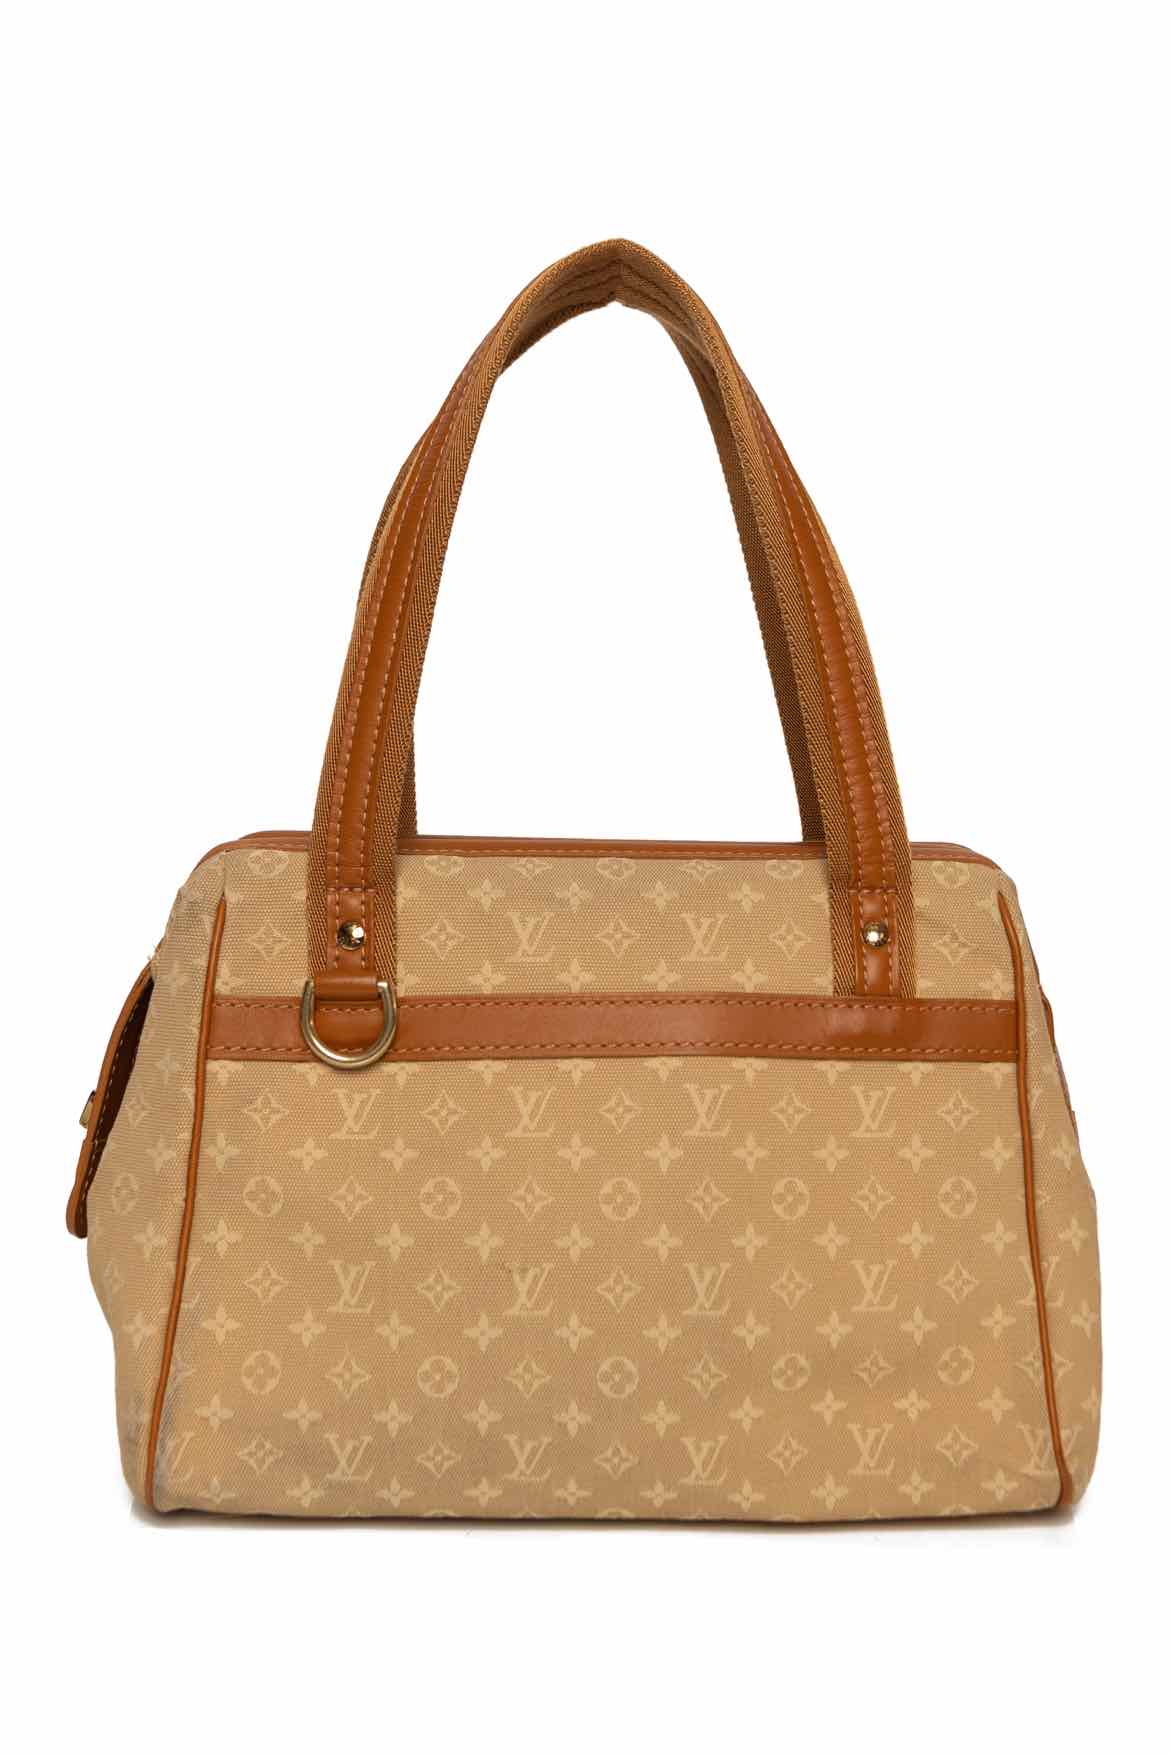 $1500 or more – Tagged Louis Vuitton – Turnabout Luxury Resale